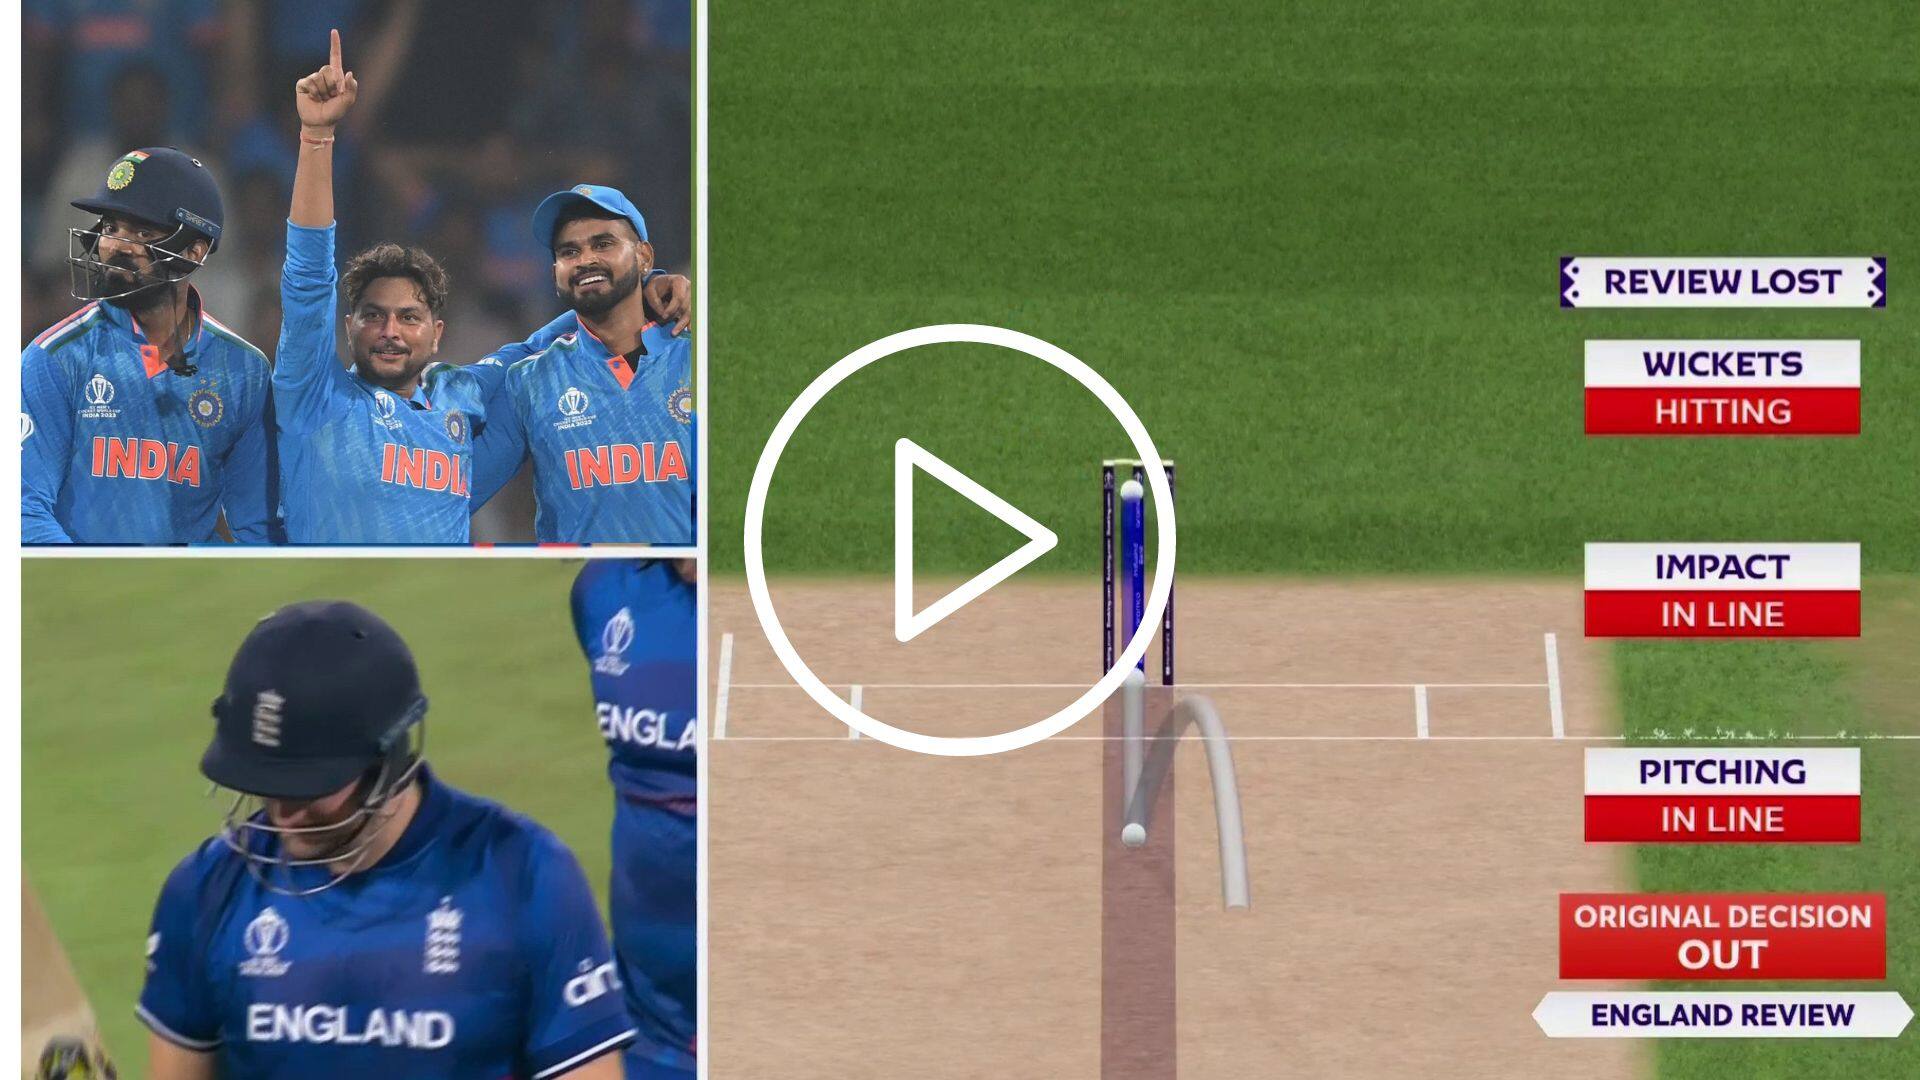 [Watch] Kuldeep Yadav's Wily Delivery Leaves Liam Livingstone Plumb in Front